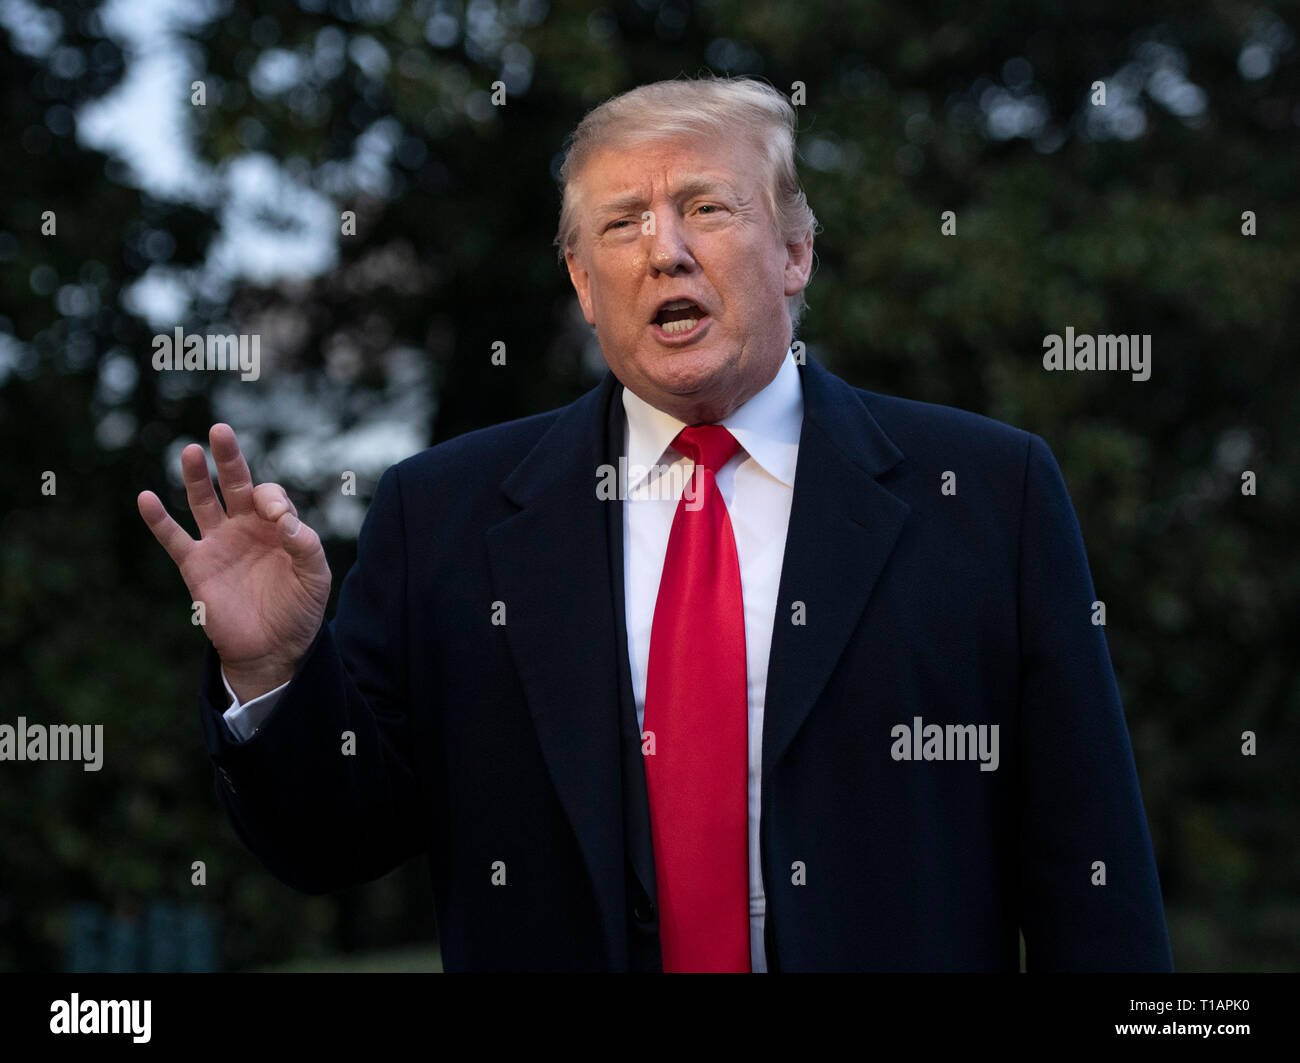 United States President Donald J. Trump returns to the White House in Washington, DC following a weekend in Mar-a-Lago, Florida on Sunday, March 24, 2019. Earlier in the day US Attorney General William P. Barr released a summary of the long-awaited Mueller Report that appears to exonerate the President and his campaign of all charges related to collusion with Russia in the 2016 Presidential Campaign and subsequent obstruction of justice charges. The President said to the press as he walked into the residence 'I just want to tell you, America is the greatest place on Earth. The greatest place Stock Photo